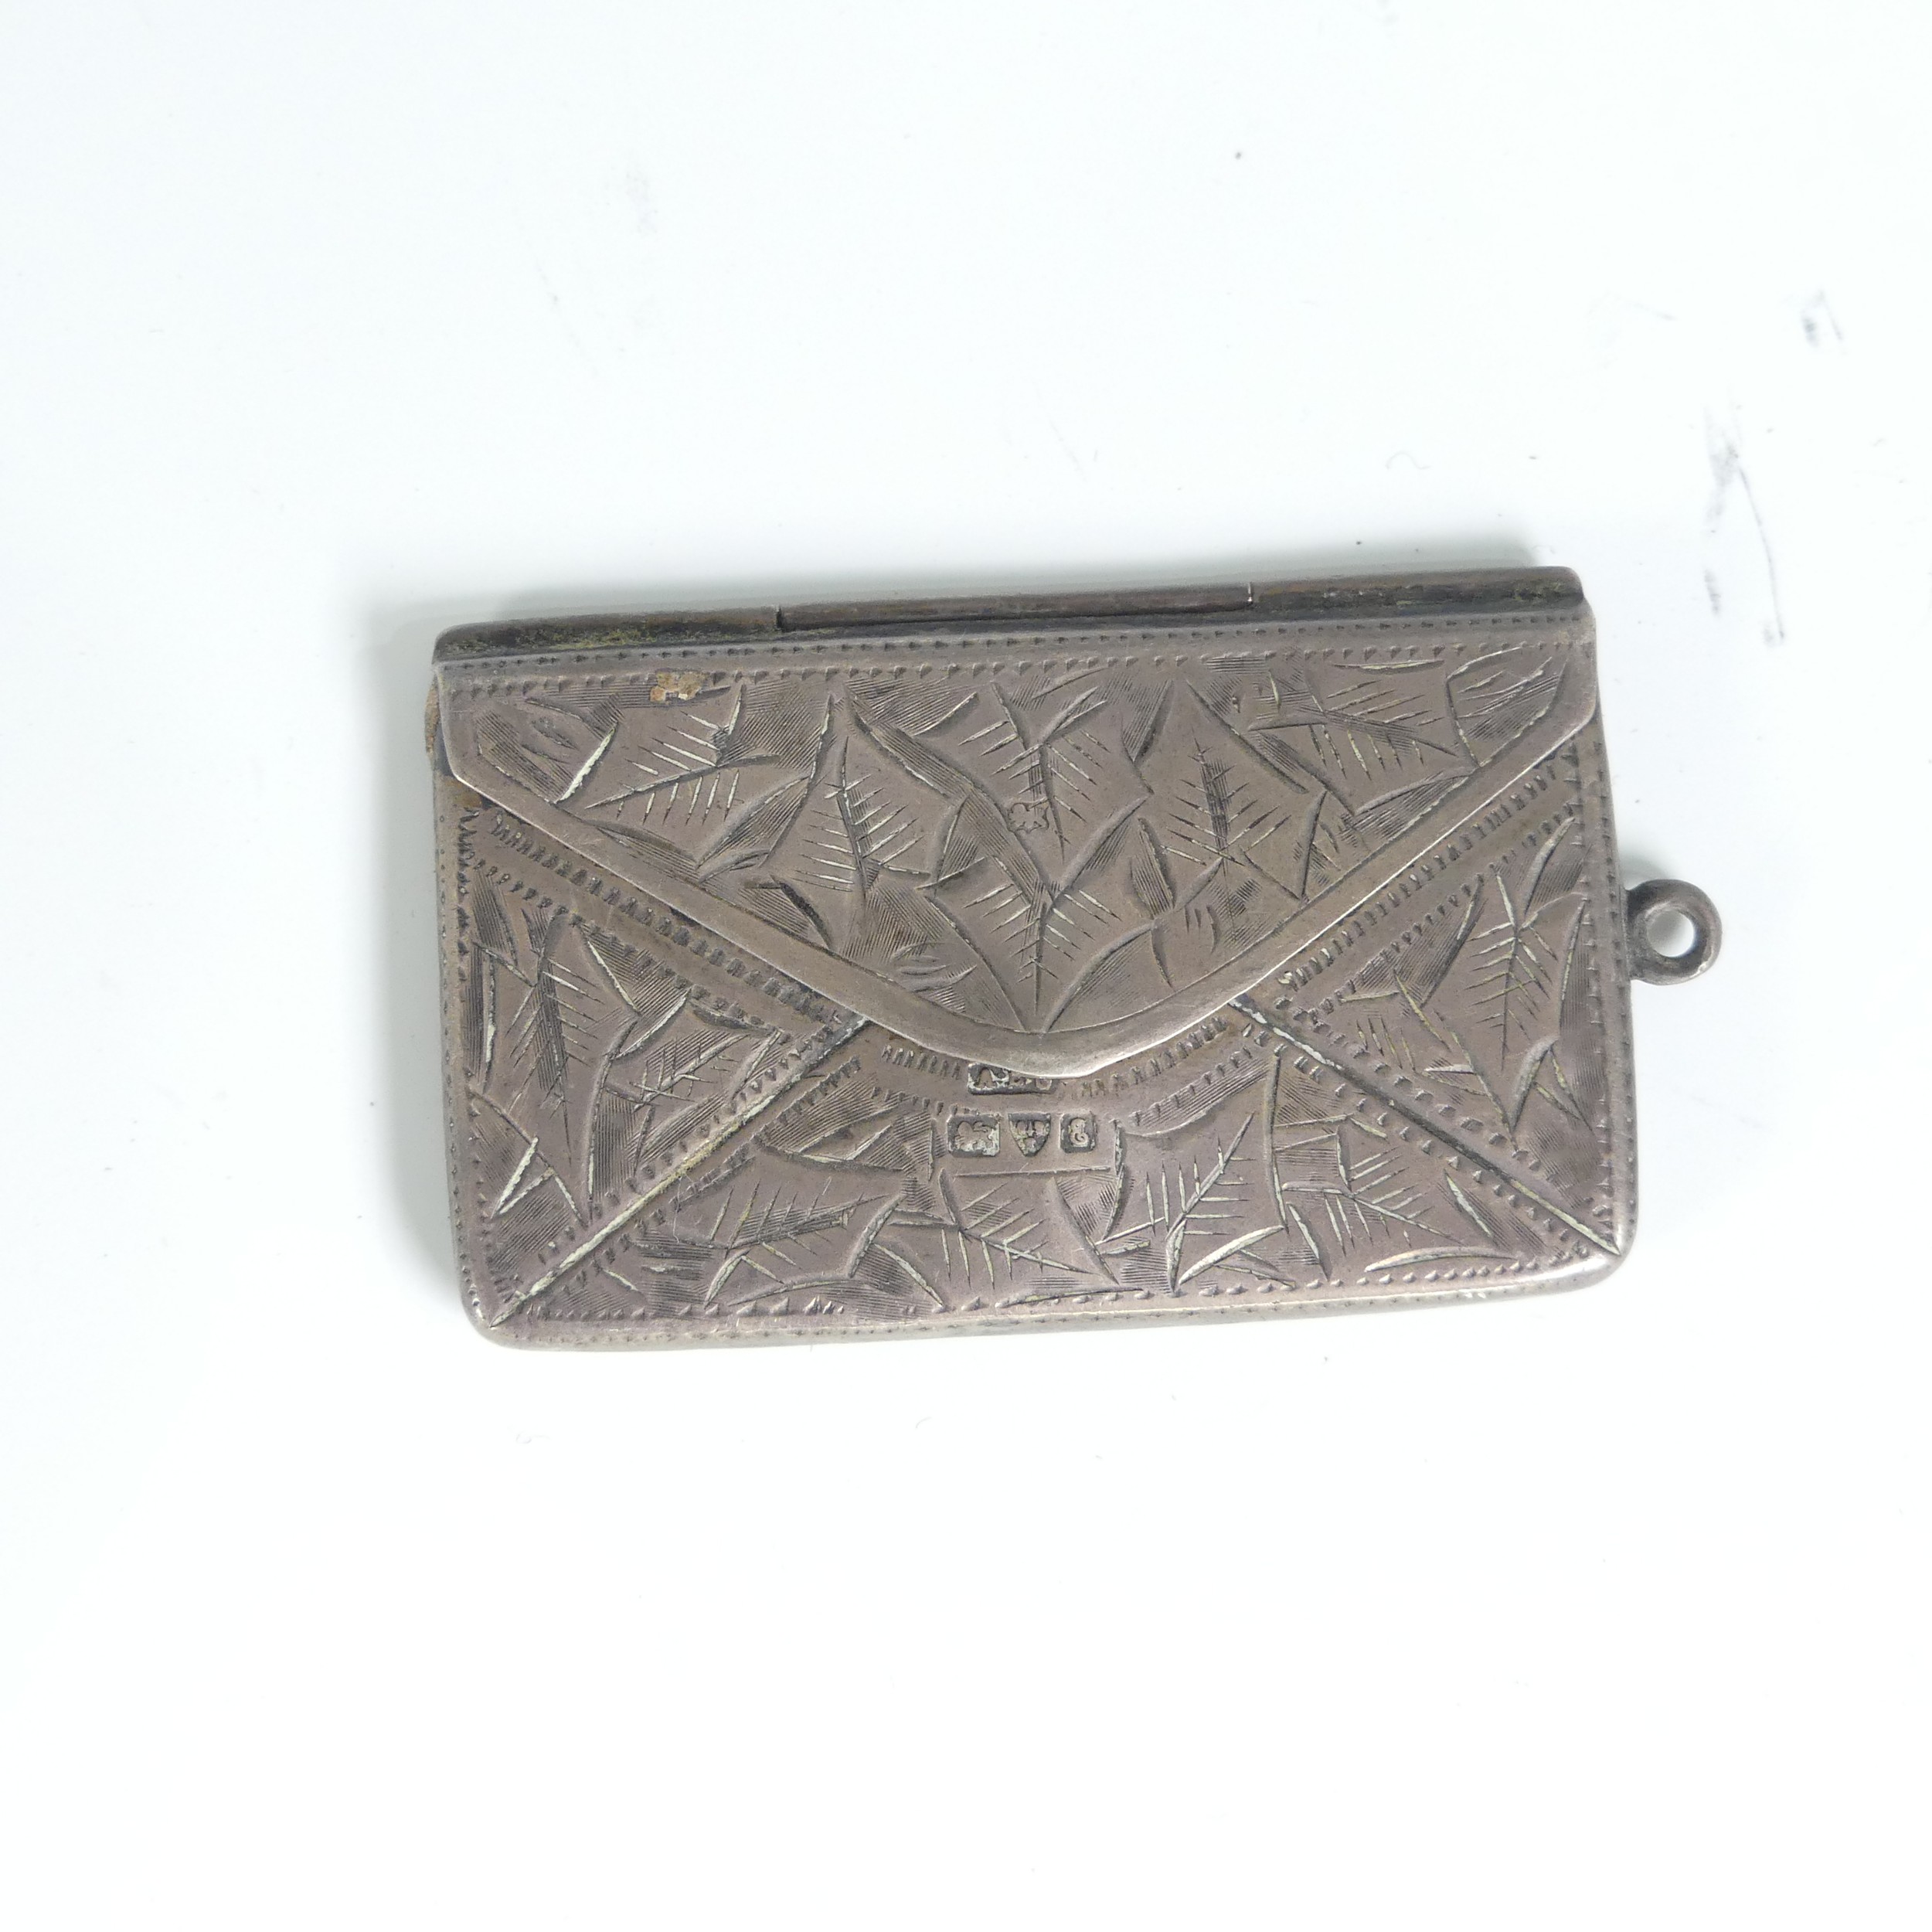 An Edwardian silver double Stamp Case, Chester 1905, of envelope form with foliate decoration, - Image 6 of 6